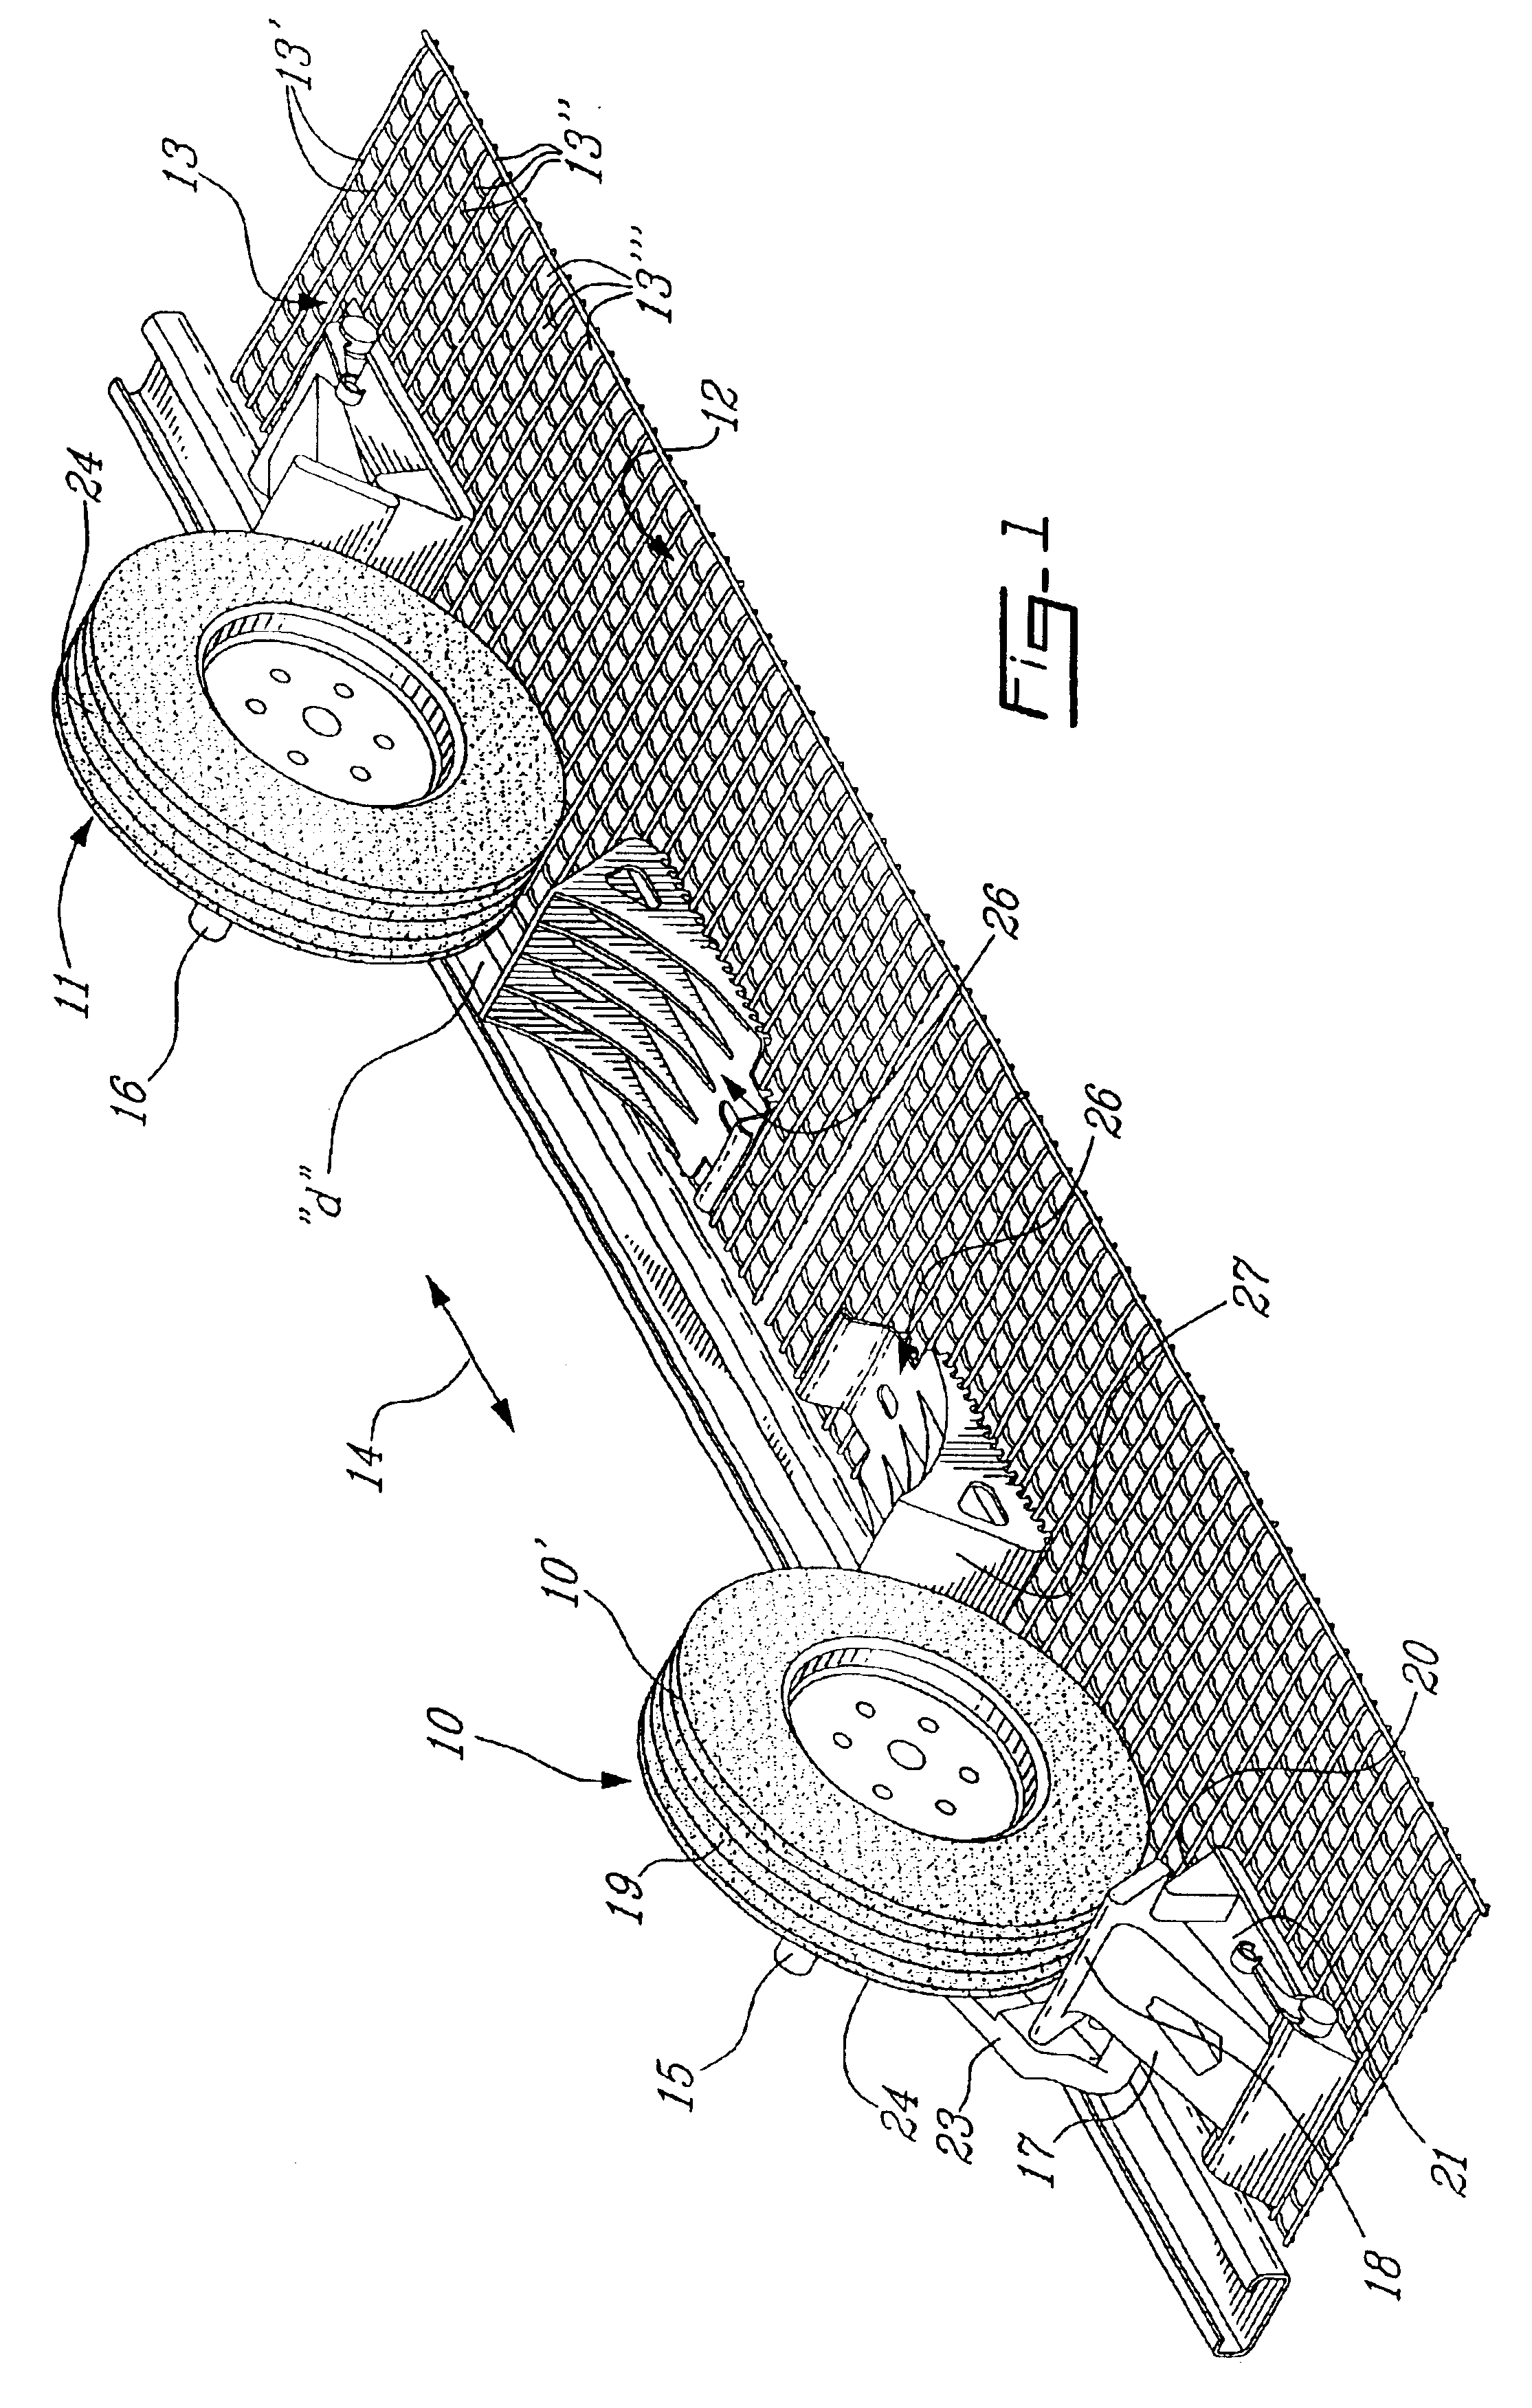 Method and system for restraining road vehicle on a transport vehicle